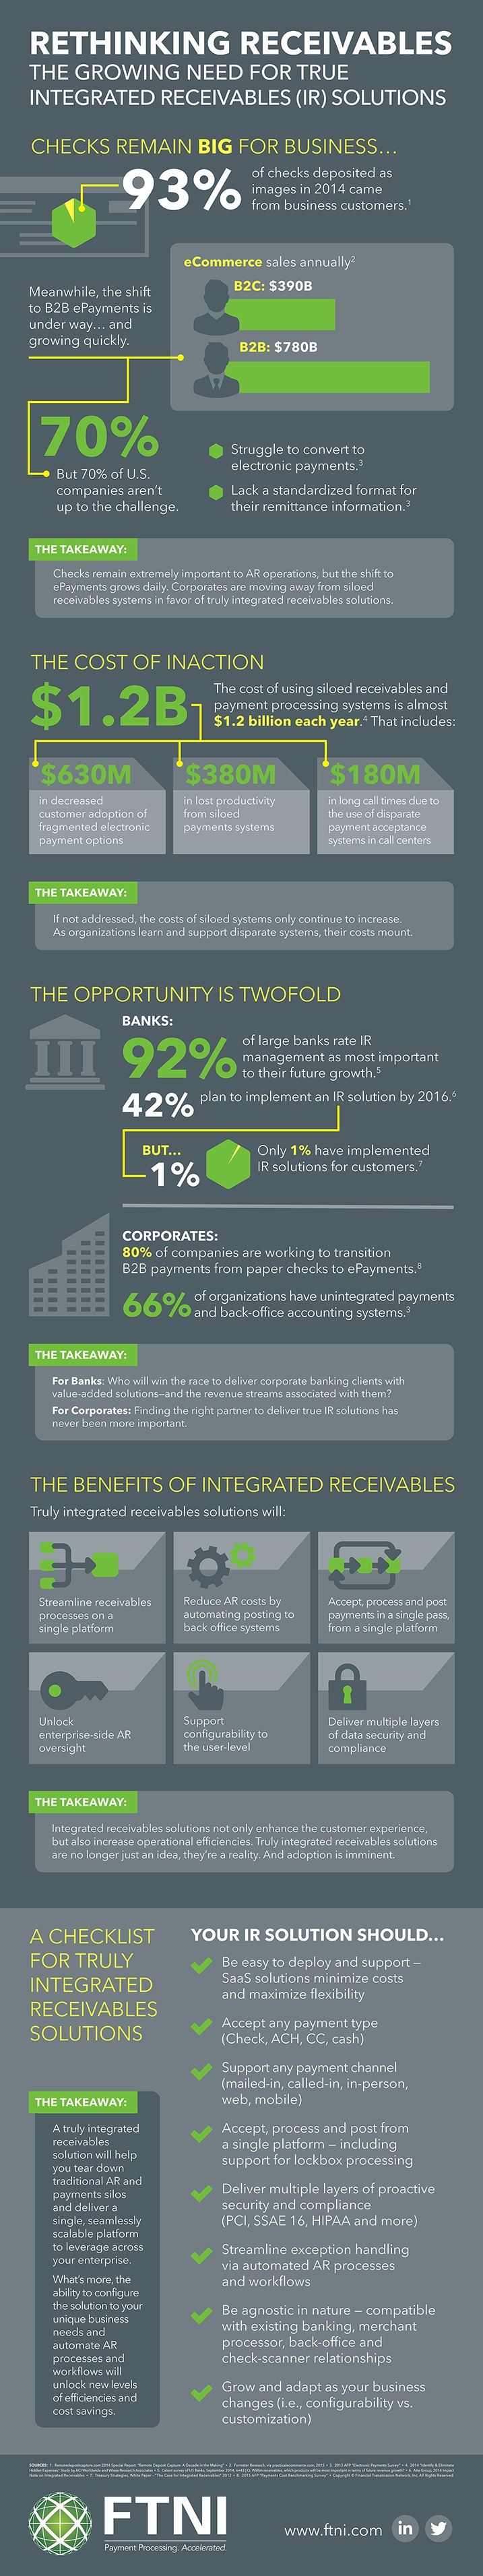 Integrated_Receivables_Infographic_SMALL.jpg